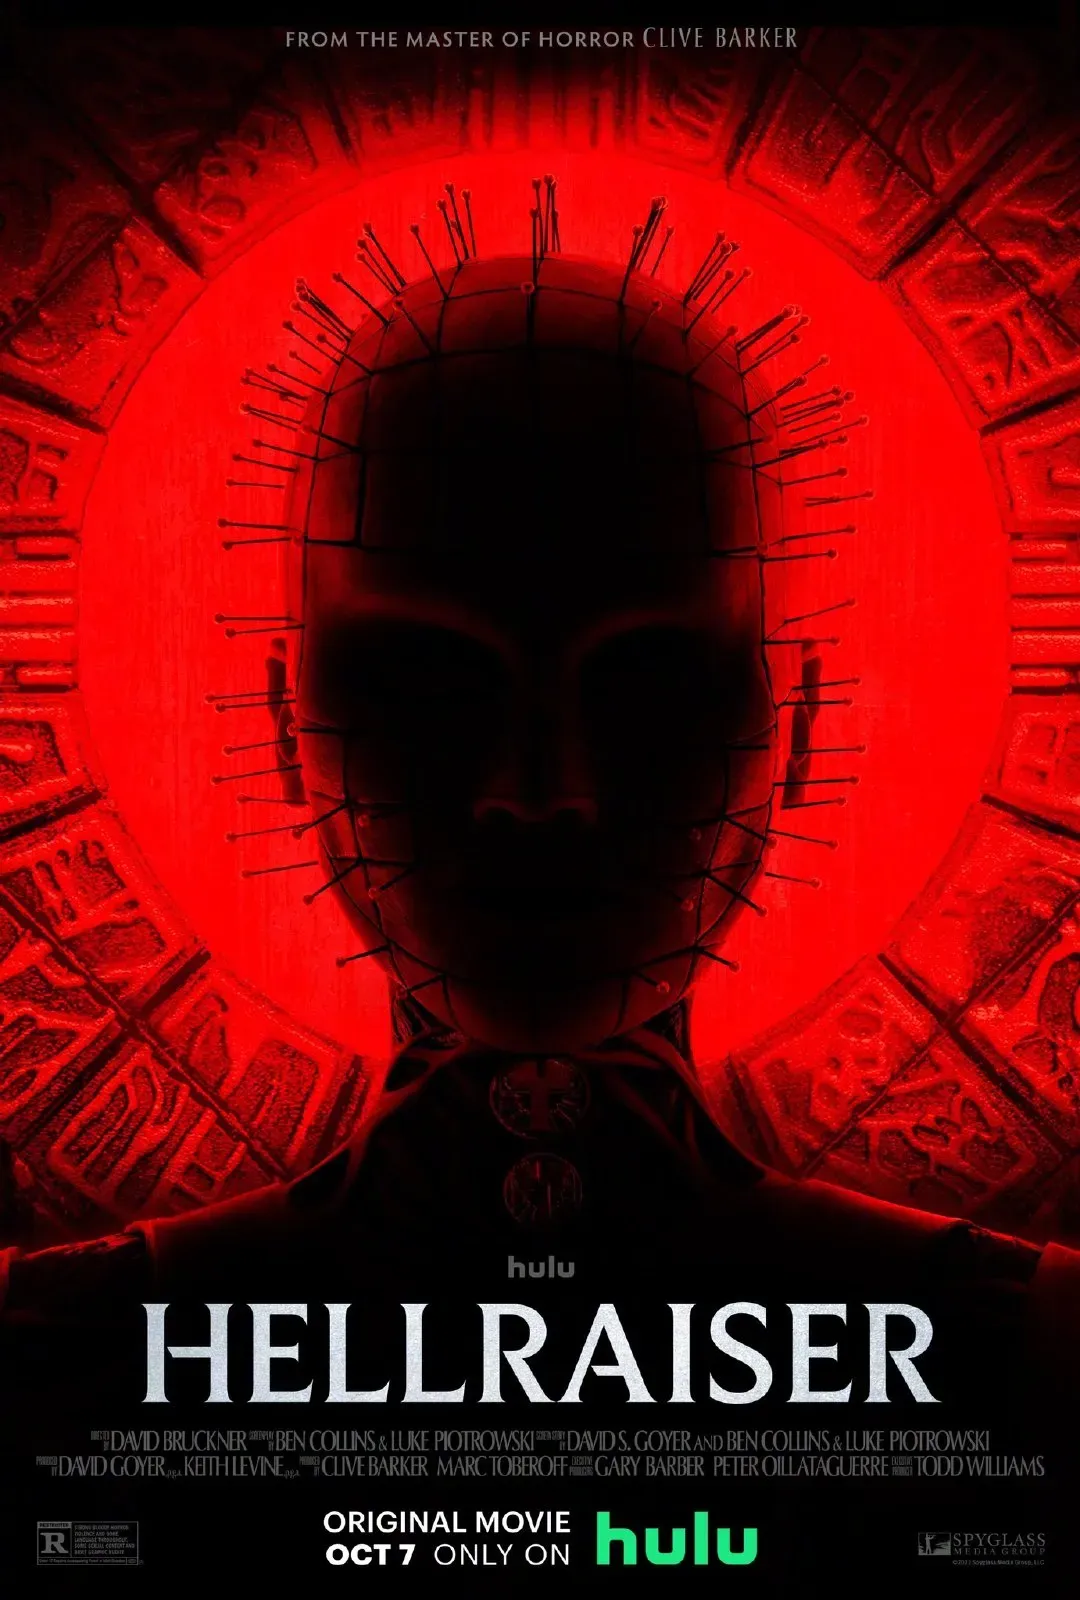 Reboot new 'Hellraiser‎' release Official Trailer and poster | FMV6